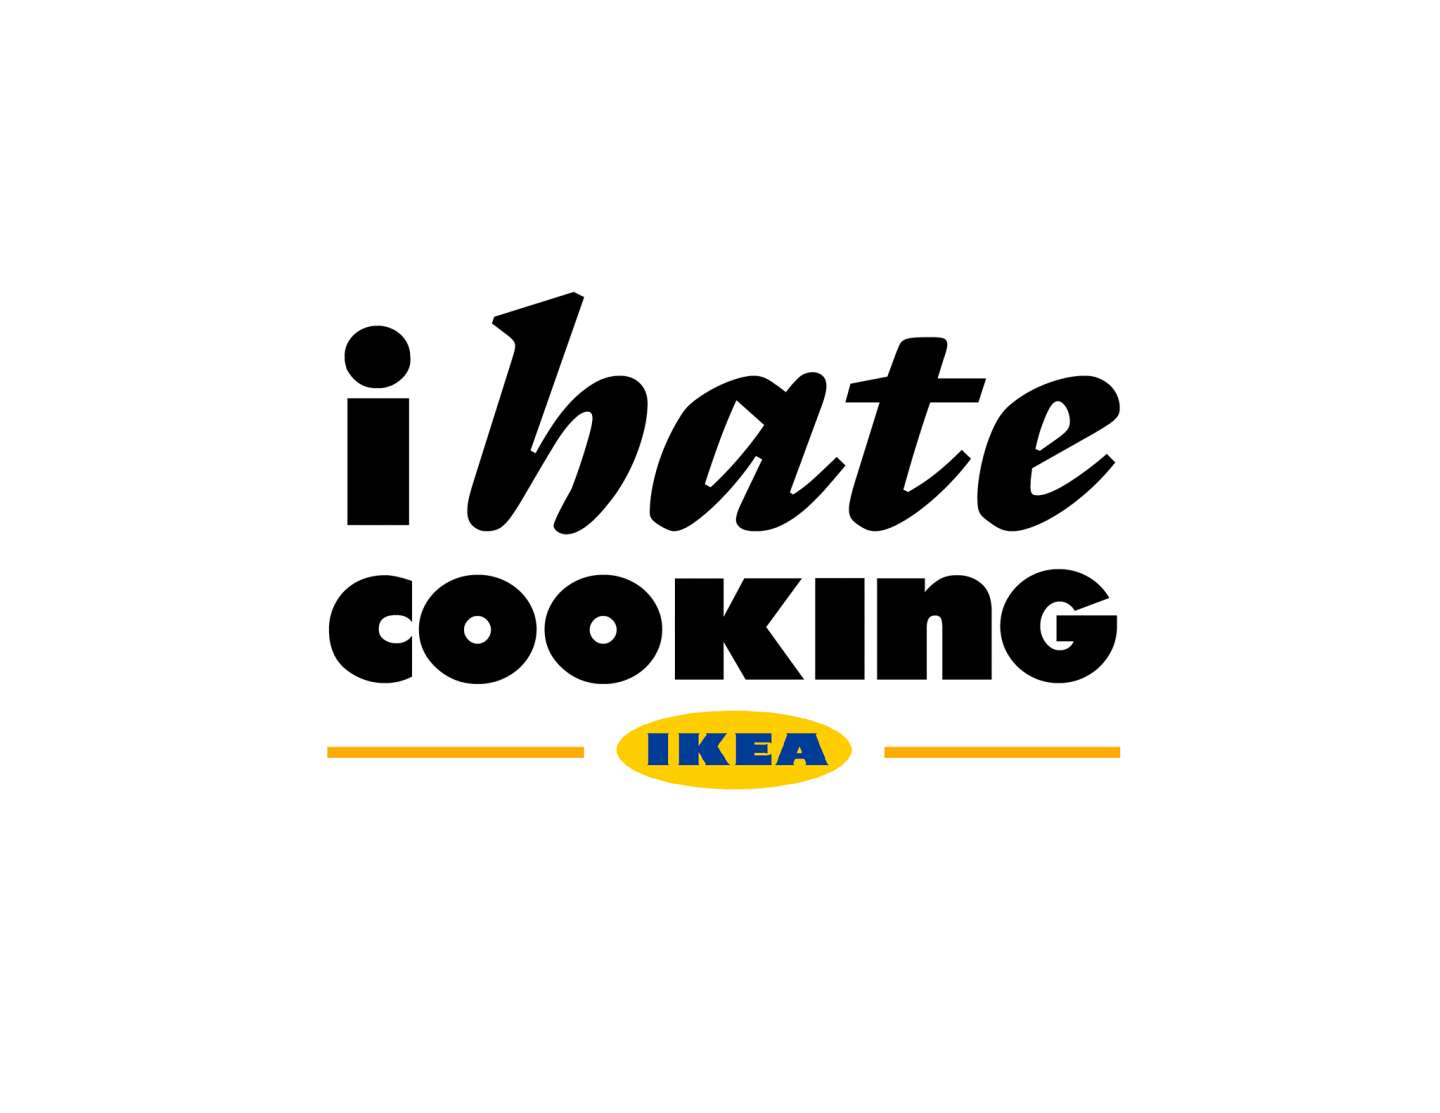 I Hate Cooking by IKEA